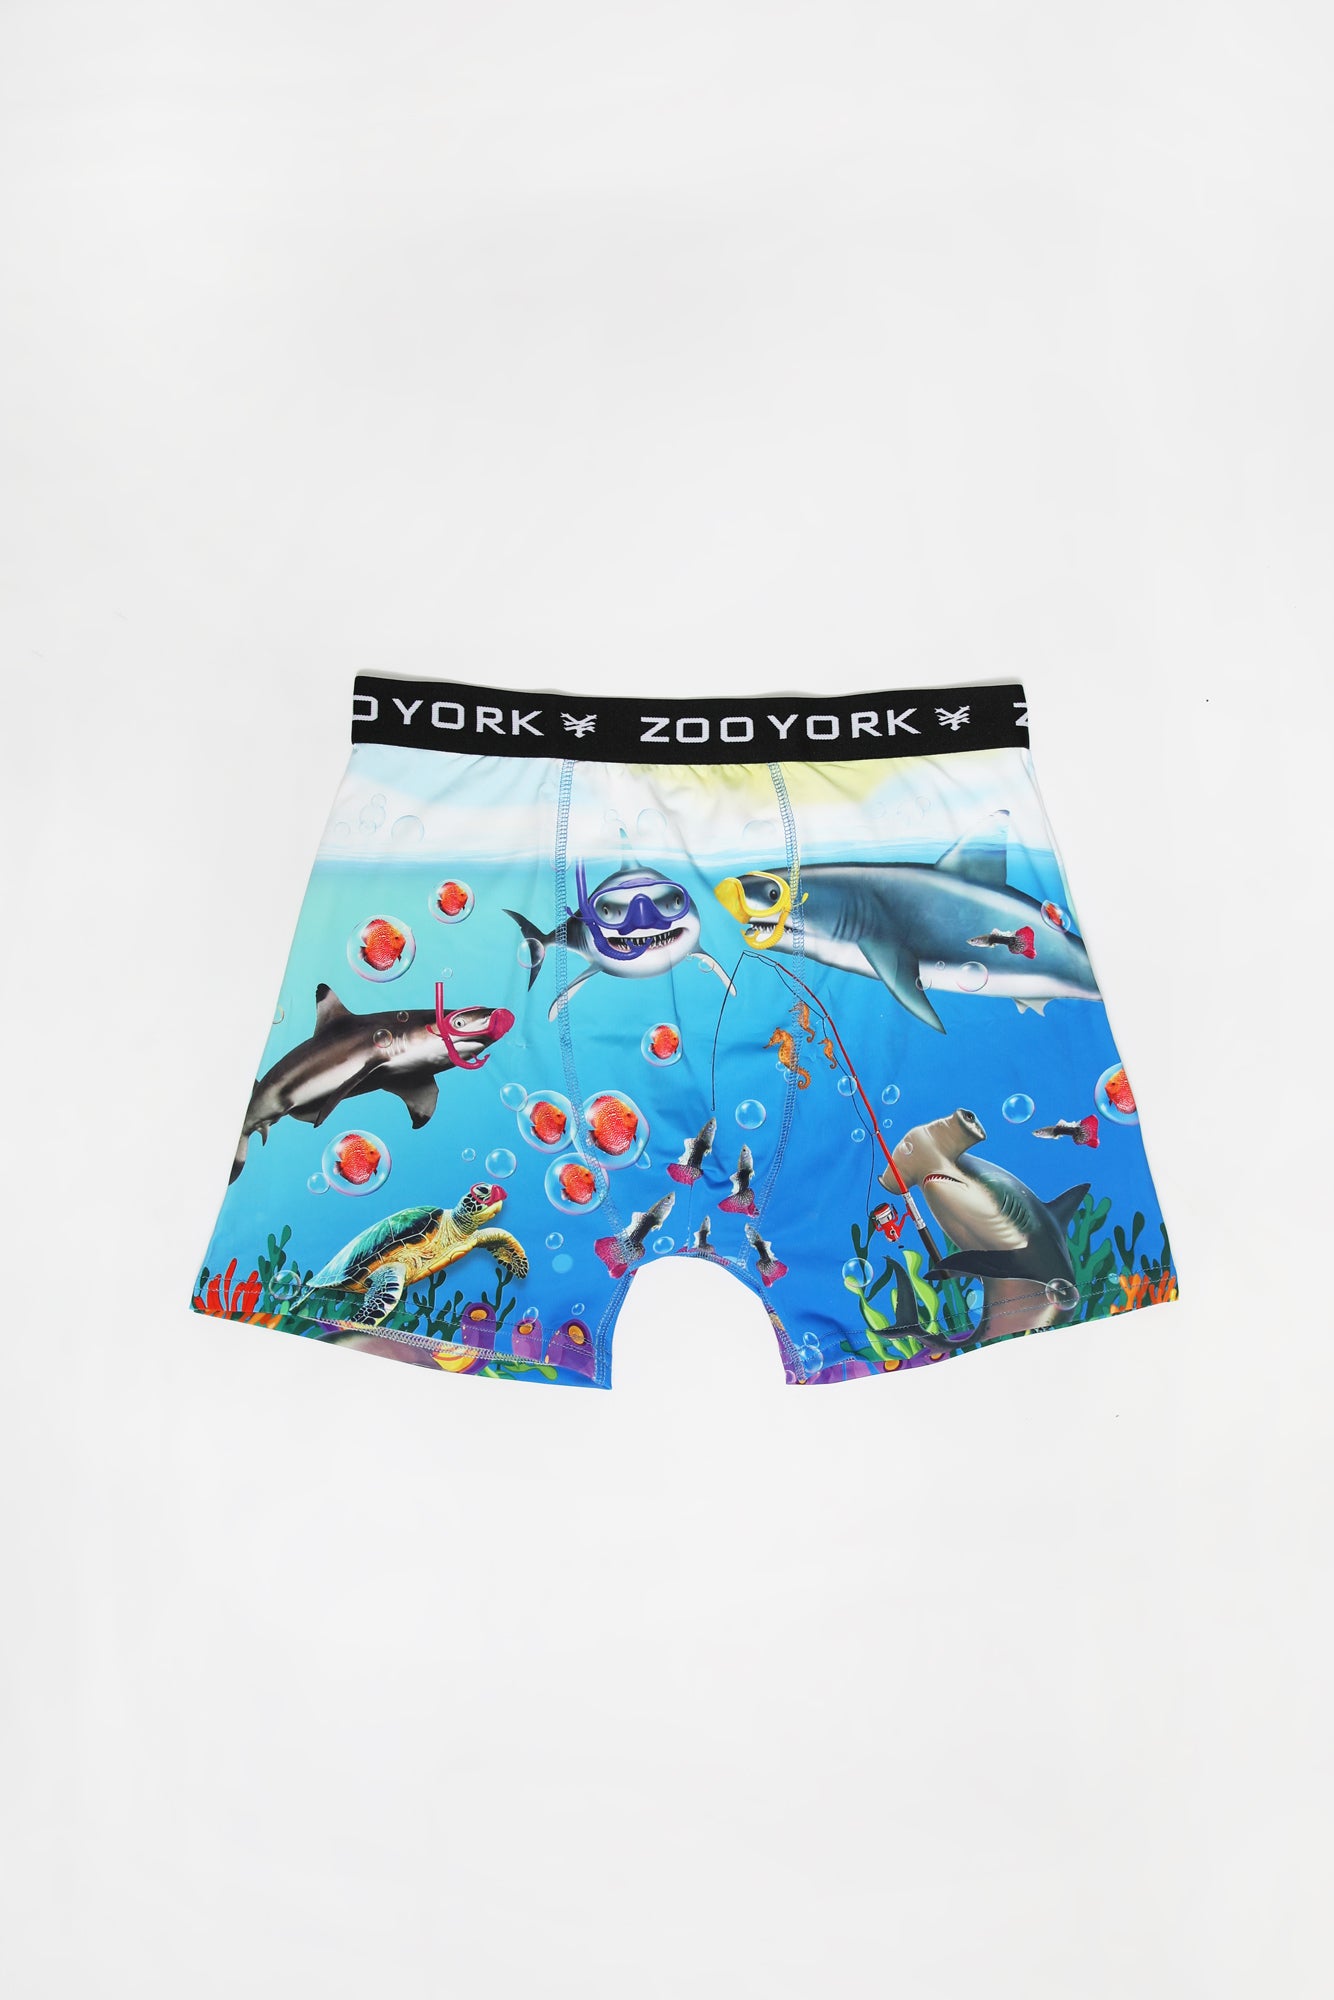 Zoo York Youth Shark Boxer Brief - Blue /